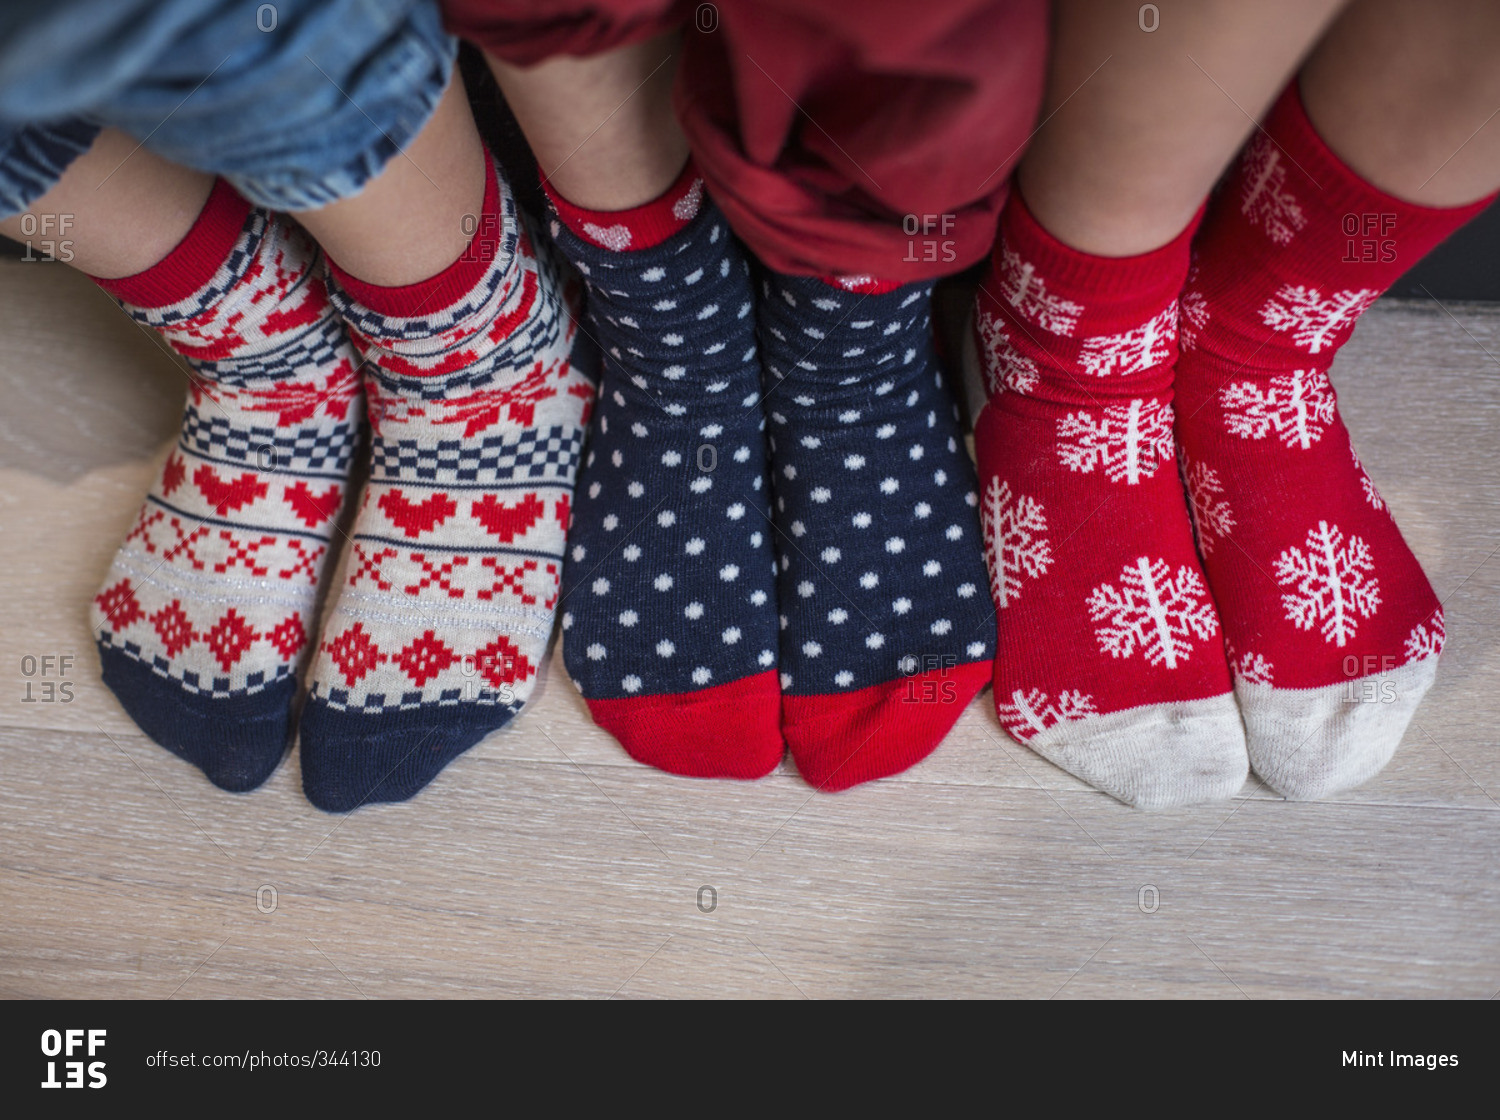 Three pairs of children's feet in bright patterned Christmas socks